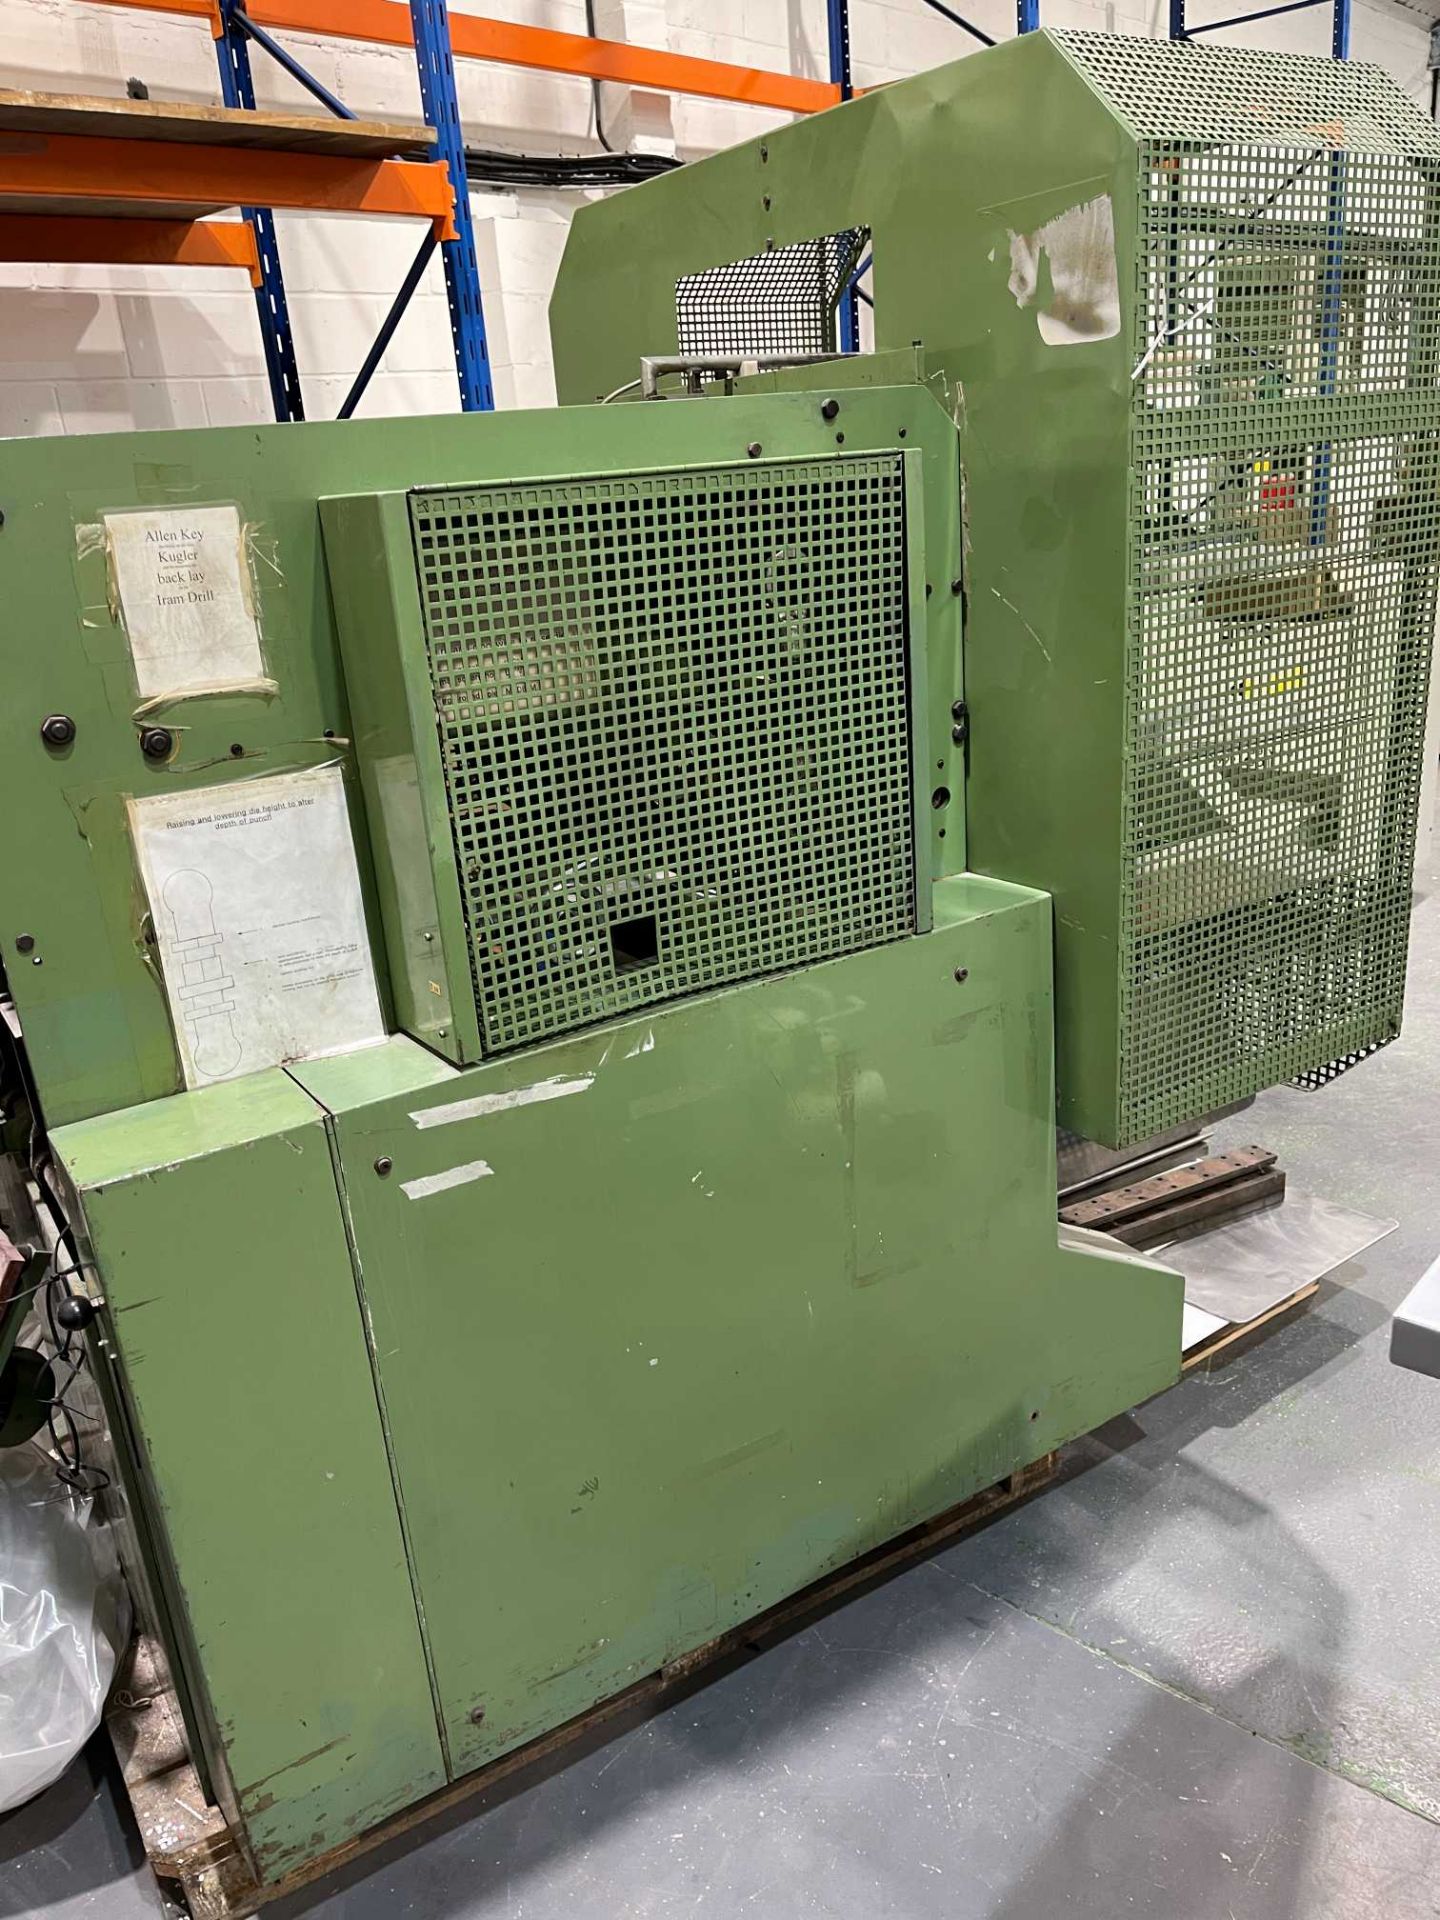 Kugler heavy duty automatic punching machine; Serial No: 1046-341-2 (1985); 100,000 cycles per - Image 6 of 6